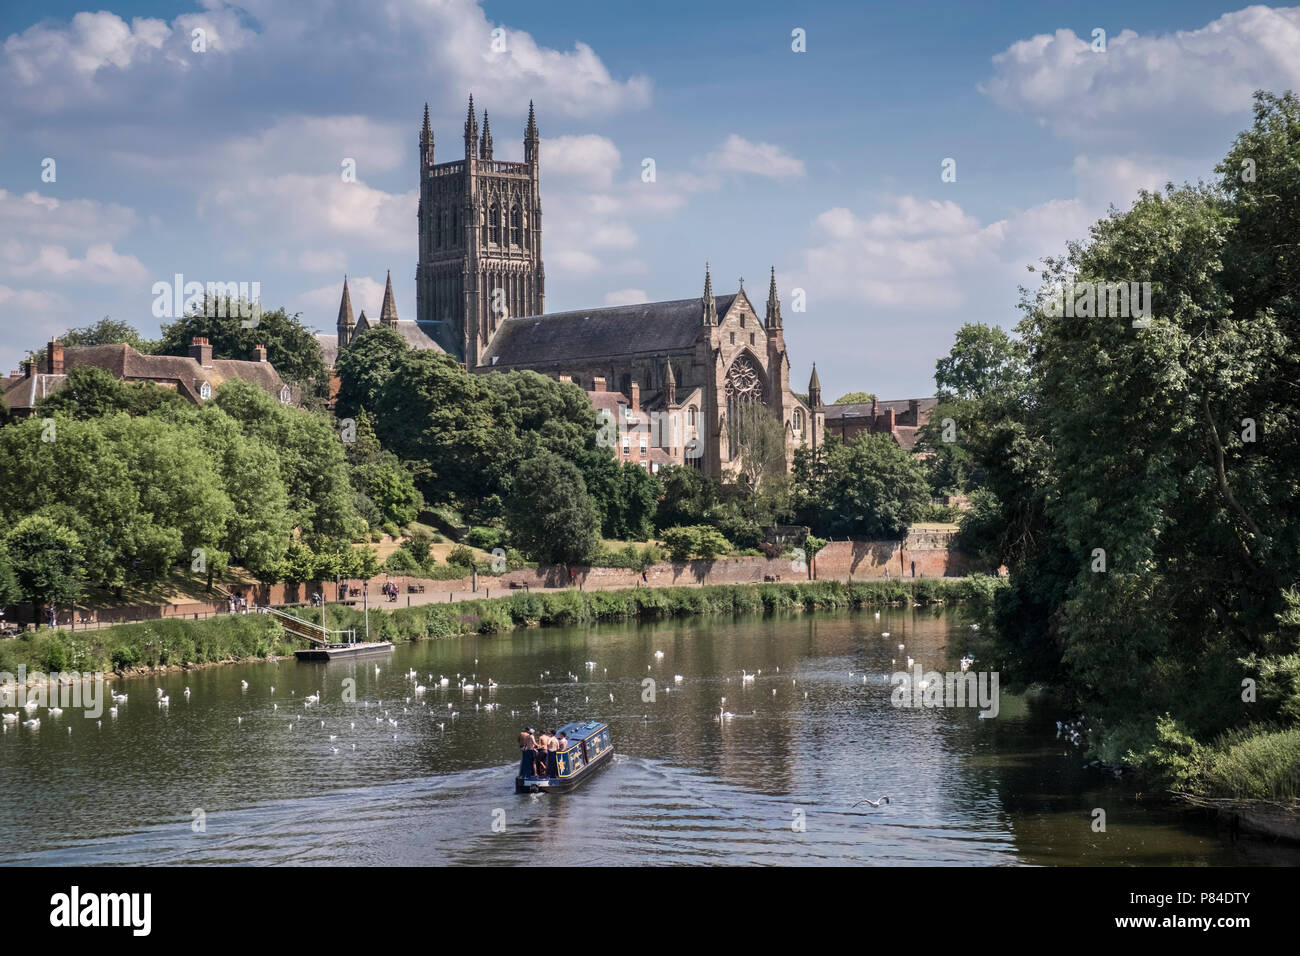 A barge sailing on the River Severn through the City of Worcester, with Worcester Cathedral in the backgound, Worcestershire, West Midlands, England. Stock Photo